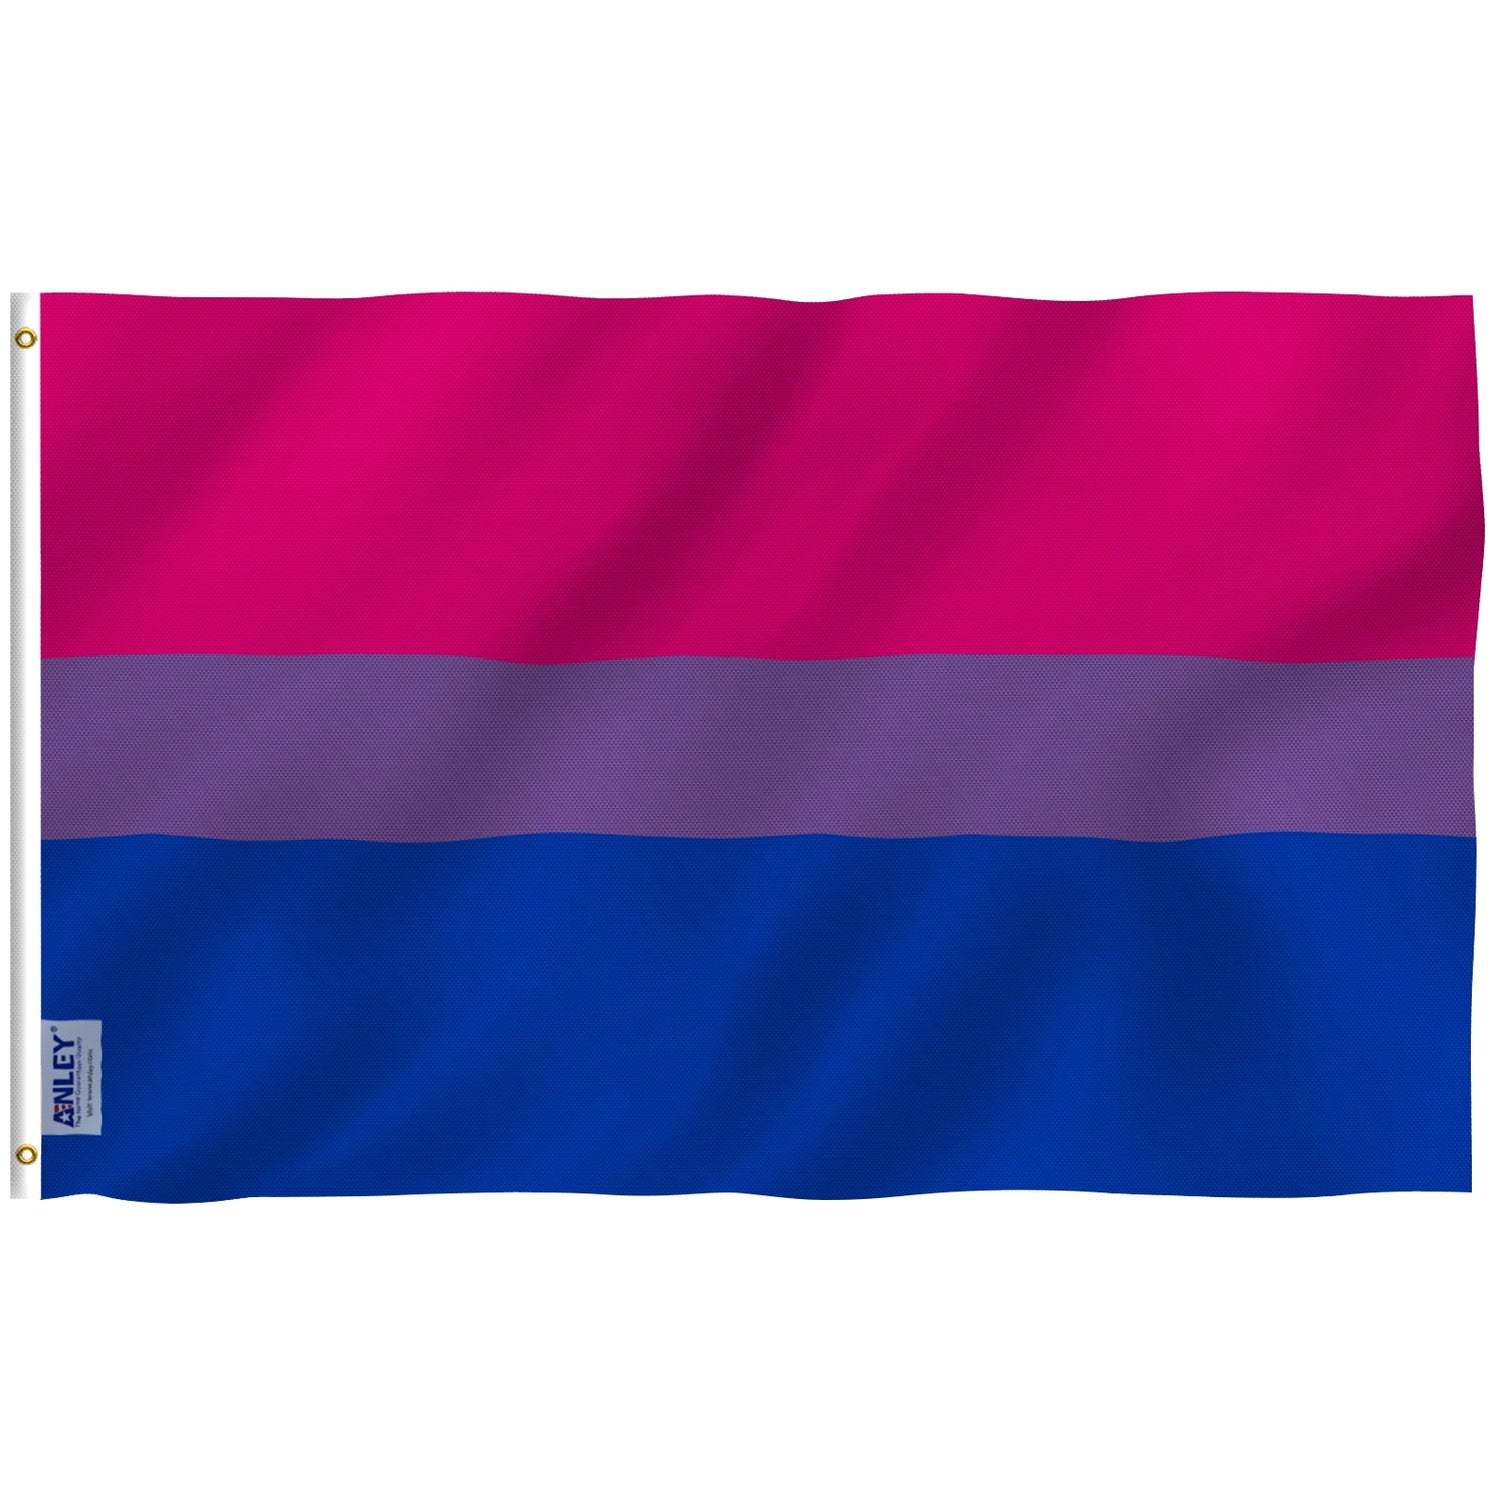 Bisexual Shirts, Apparel, Gifts